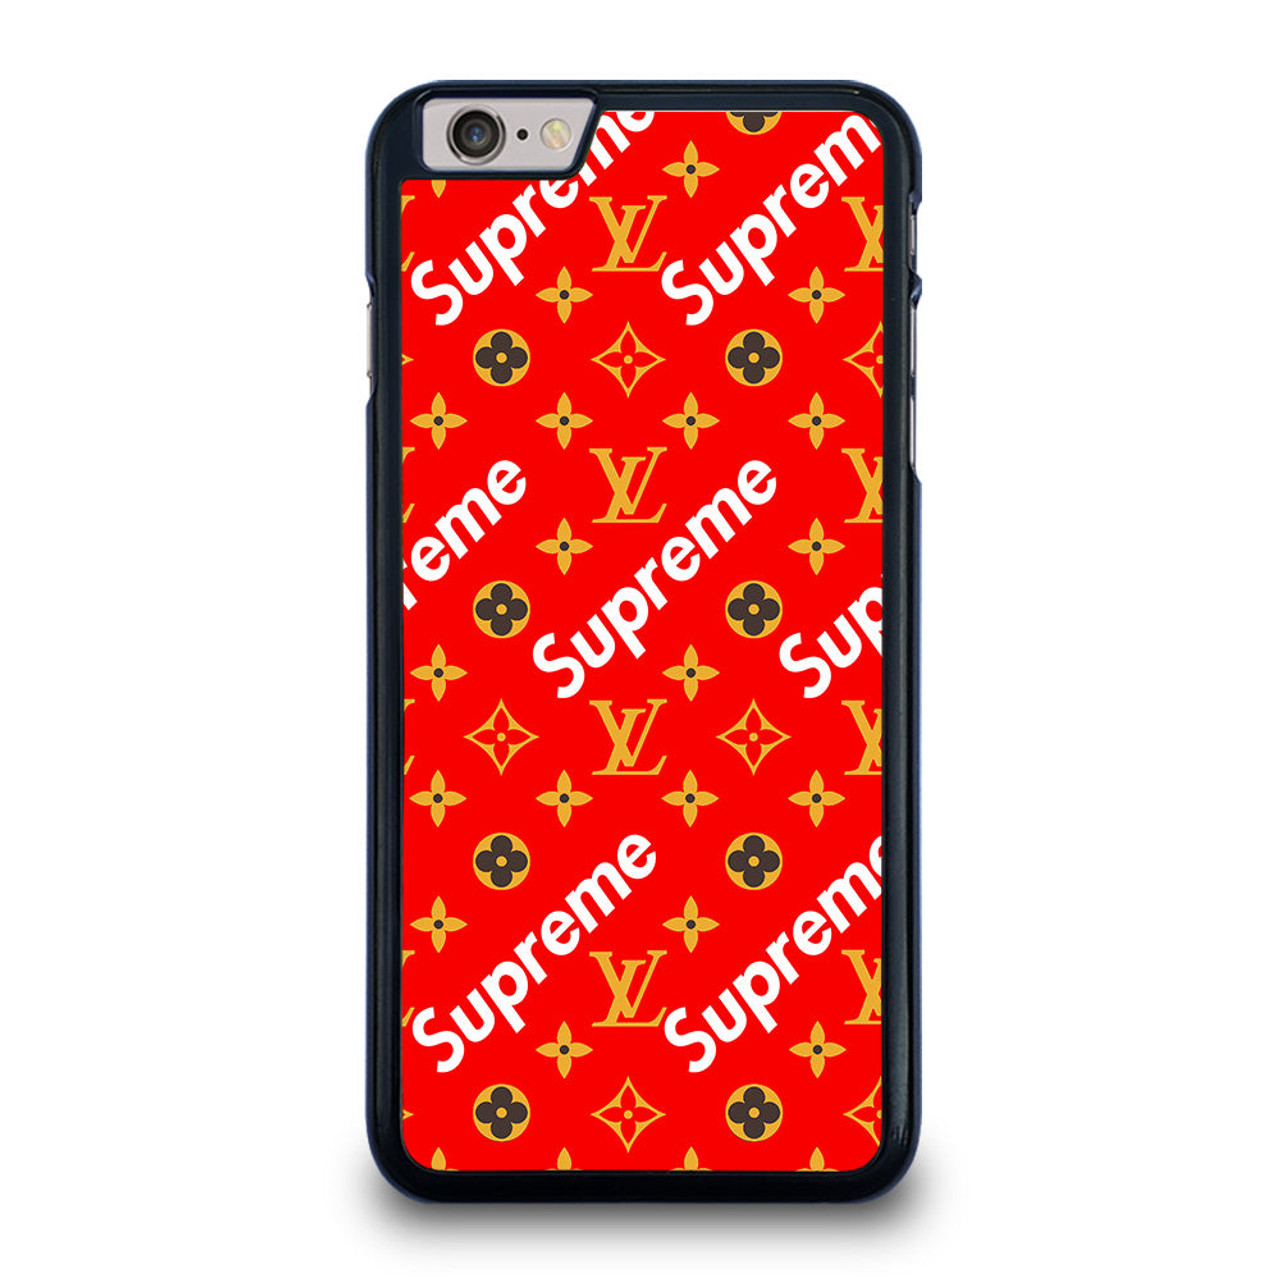 Iphone 6s Cover Supreme